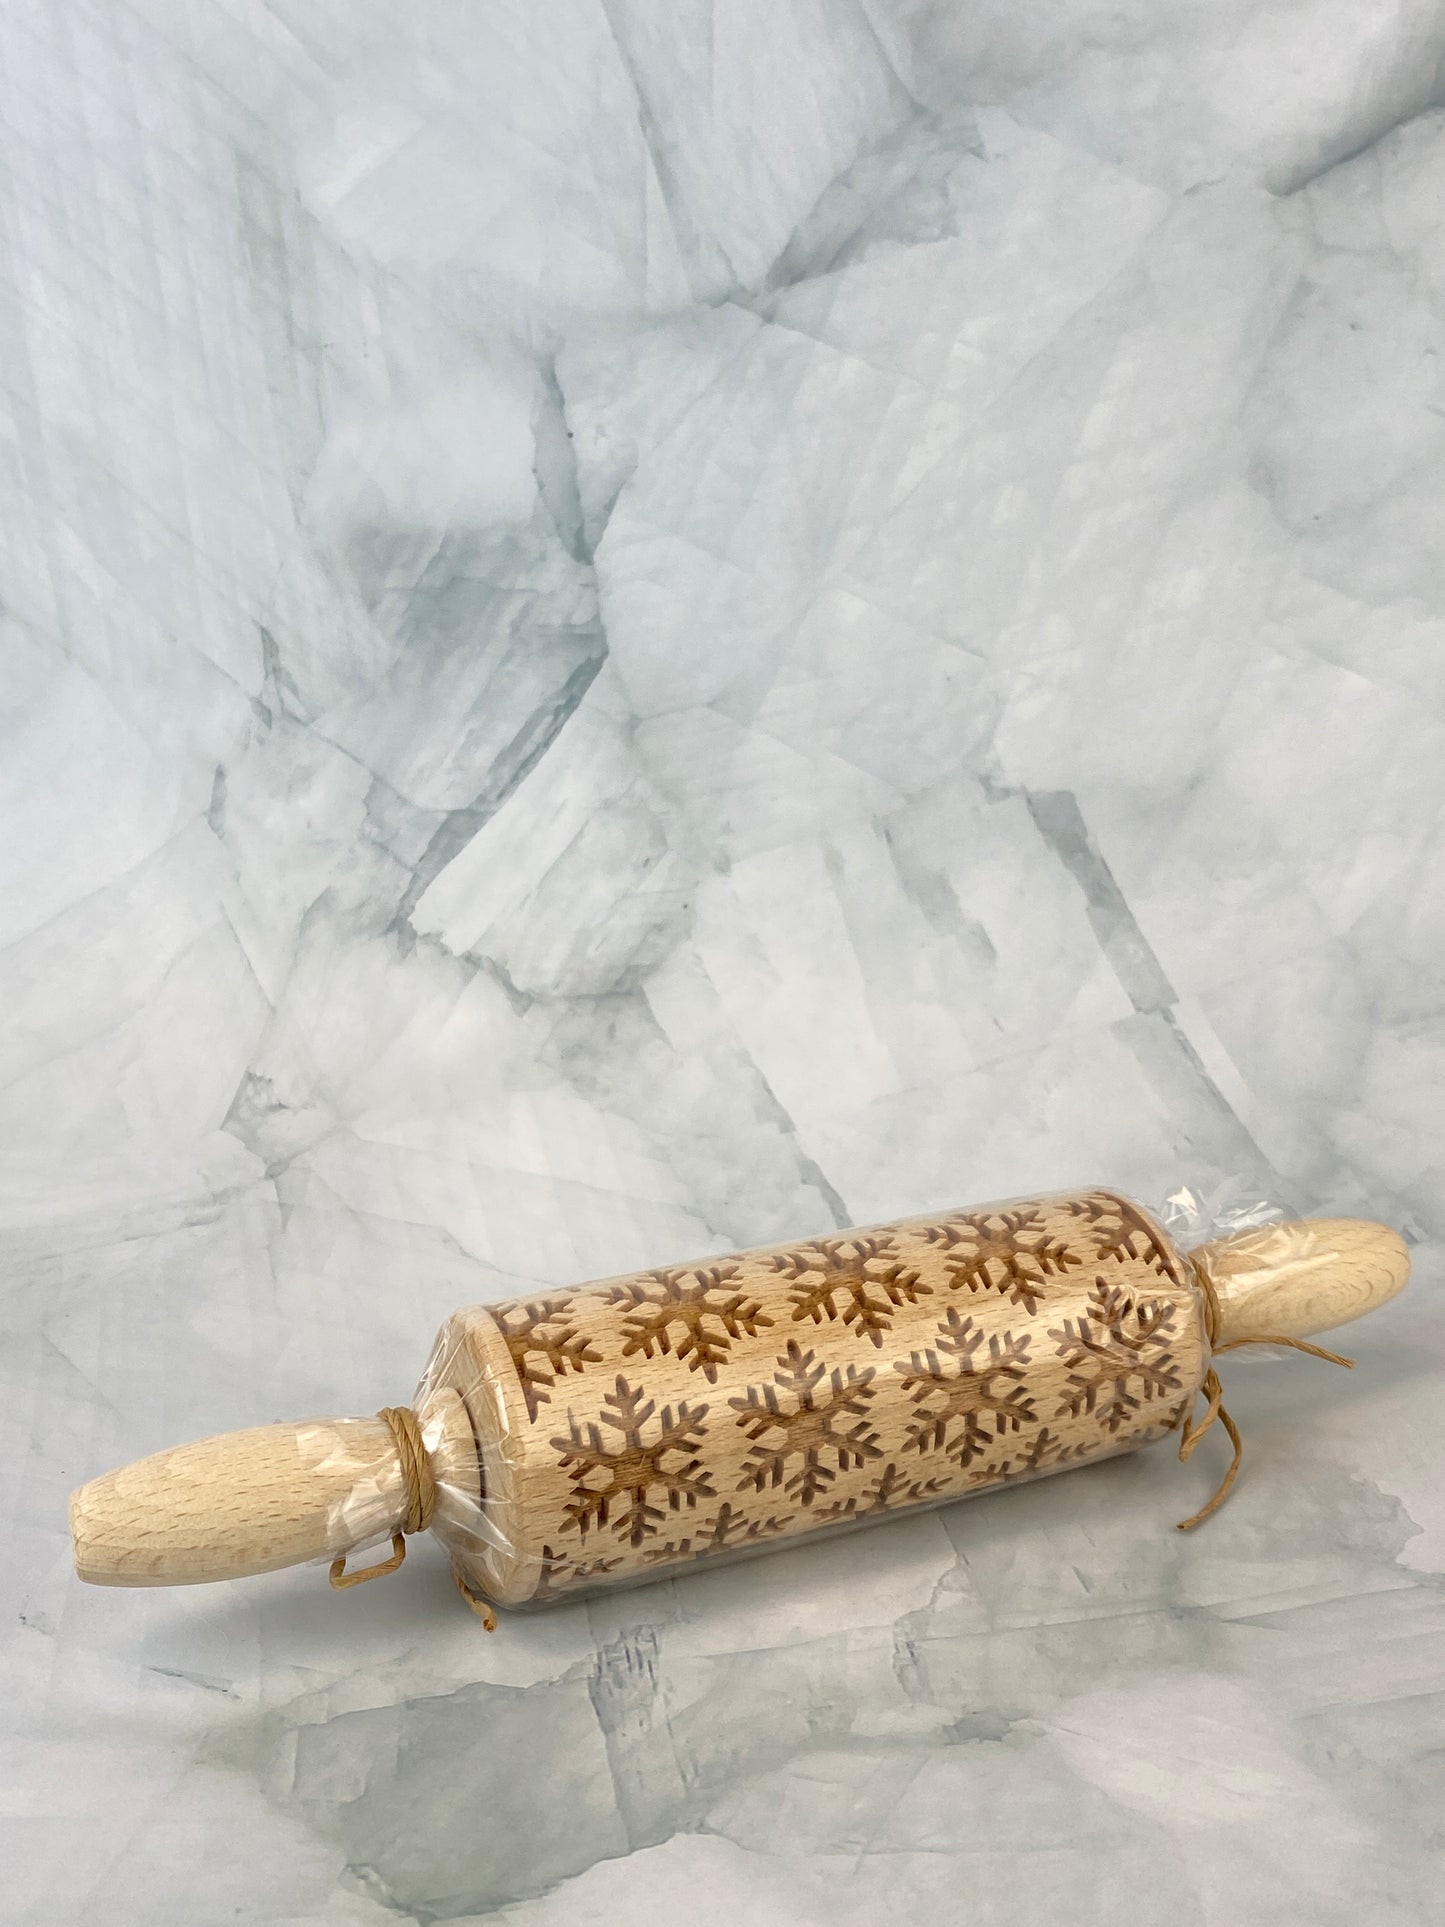 Wooden Holiday Rolling Pin - Heavy Snowfall